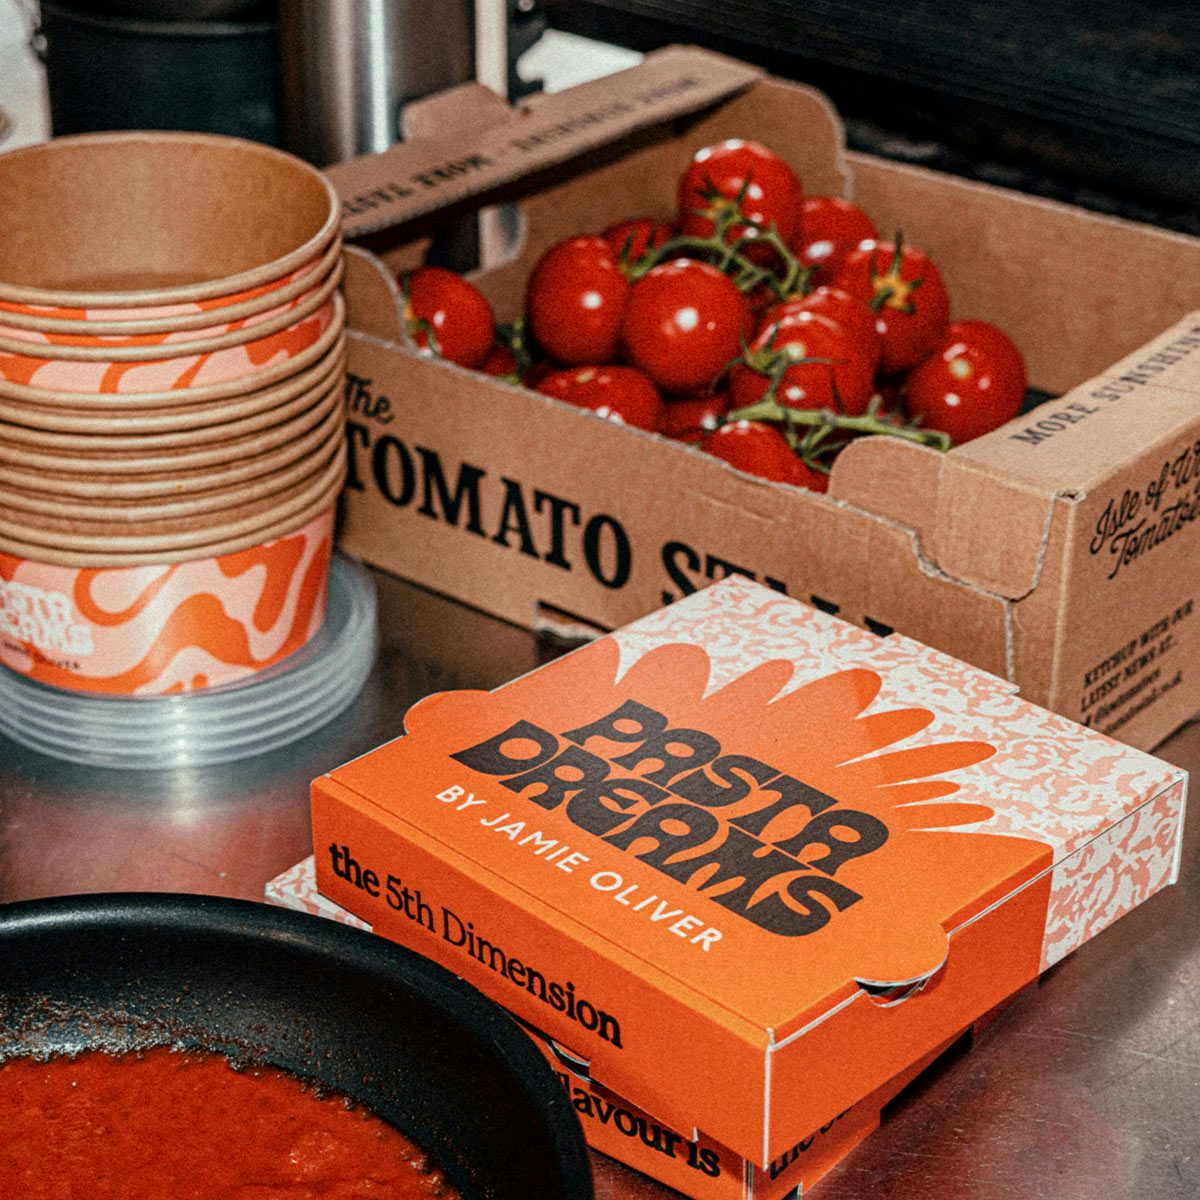 Image shows a packaging box labelled 'Pasta Dreams' next to a crate of tomatoes